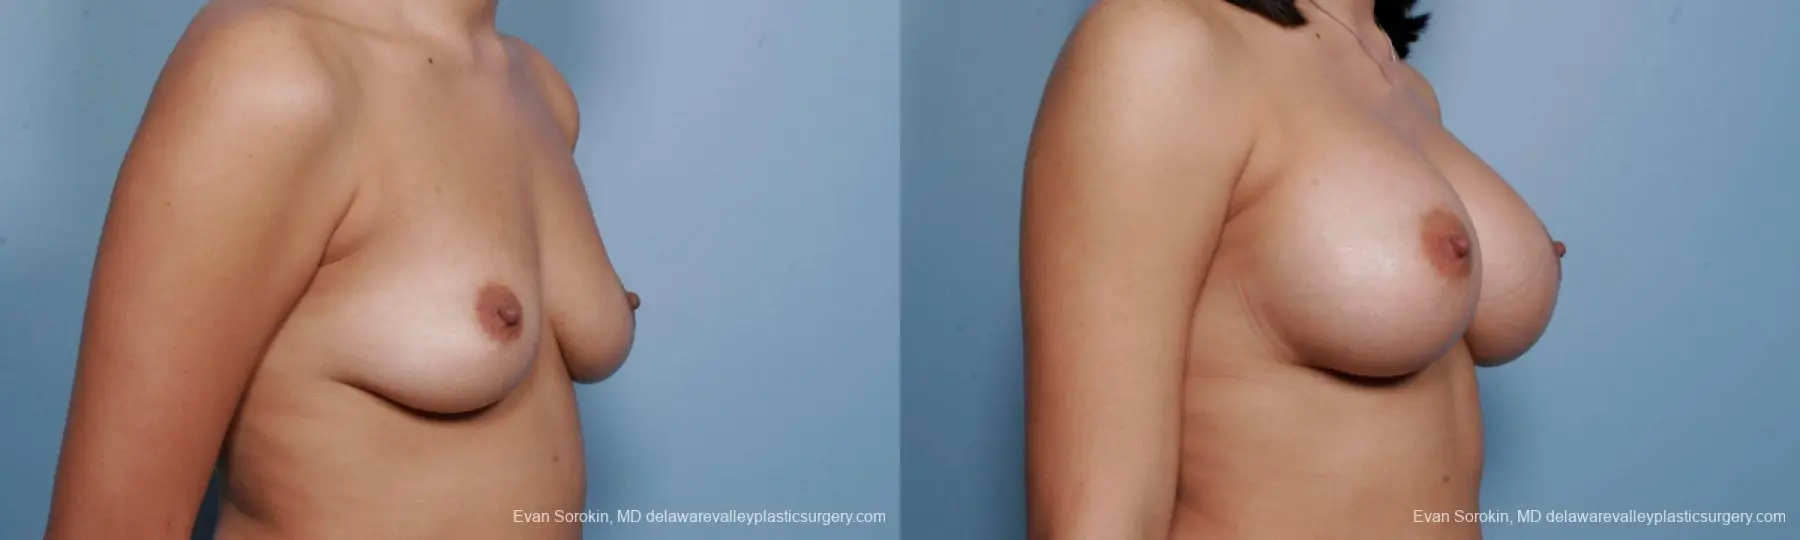 Philadelphia Breast Augmentation 9373 - Before and After 2